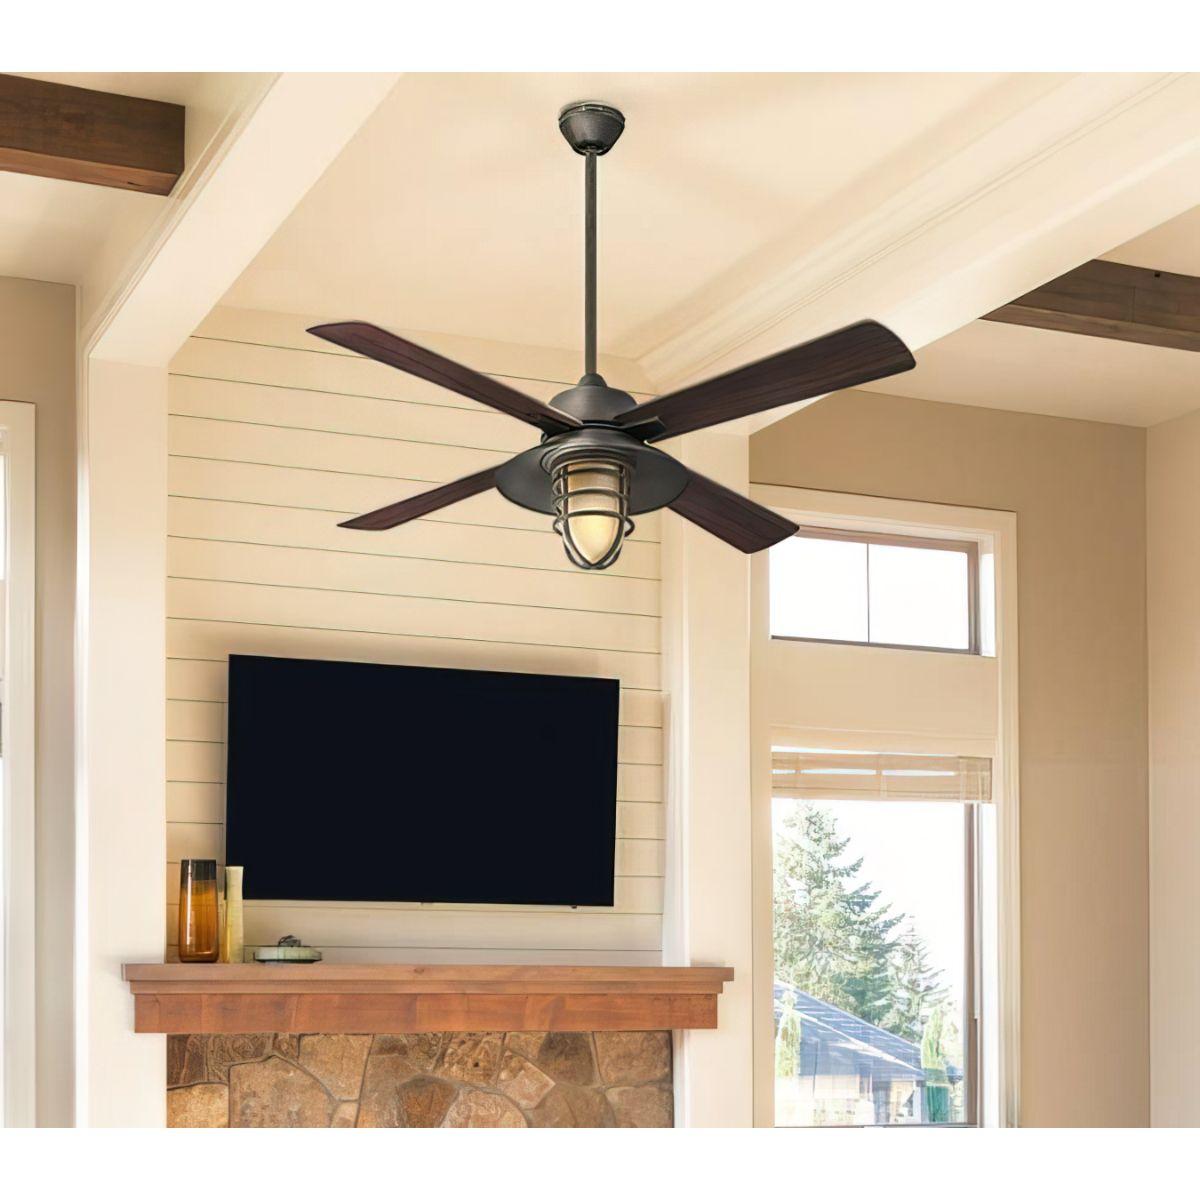 Porto 52 Inch Rustic Caged Ceiling Fan With Light And Remote